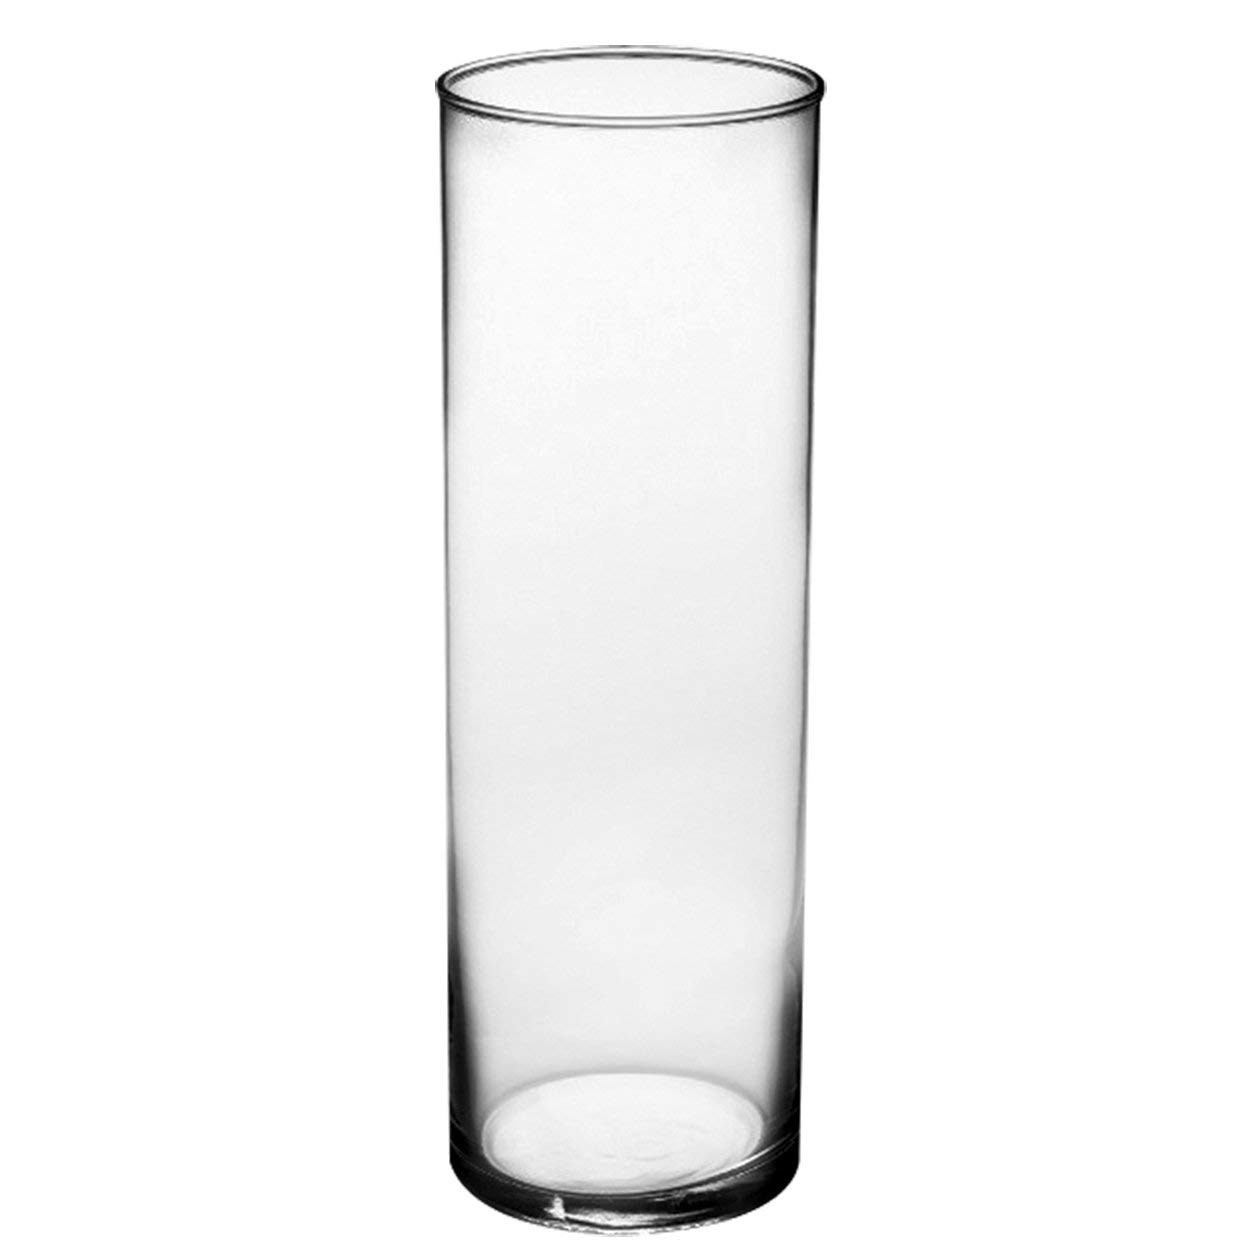 tall clear plastic vases for centerpieces of amazon com syndicate sales 3 1 2 x 10 1 2 cylinder vase clear with regard to amazon com syndicate sales 3 1 2 x 10 1 2 cylinder vase clear planters garden outdoor